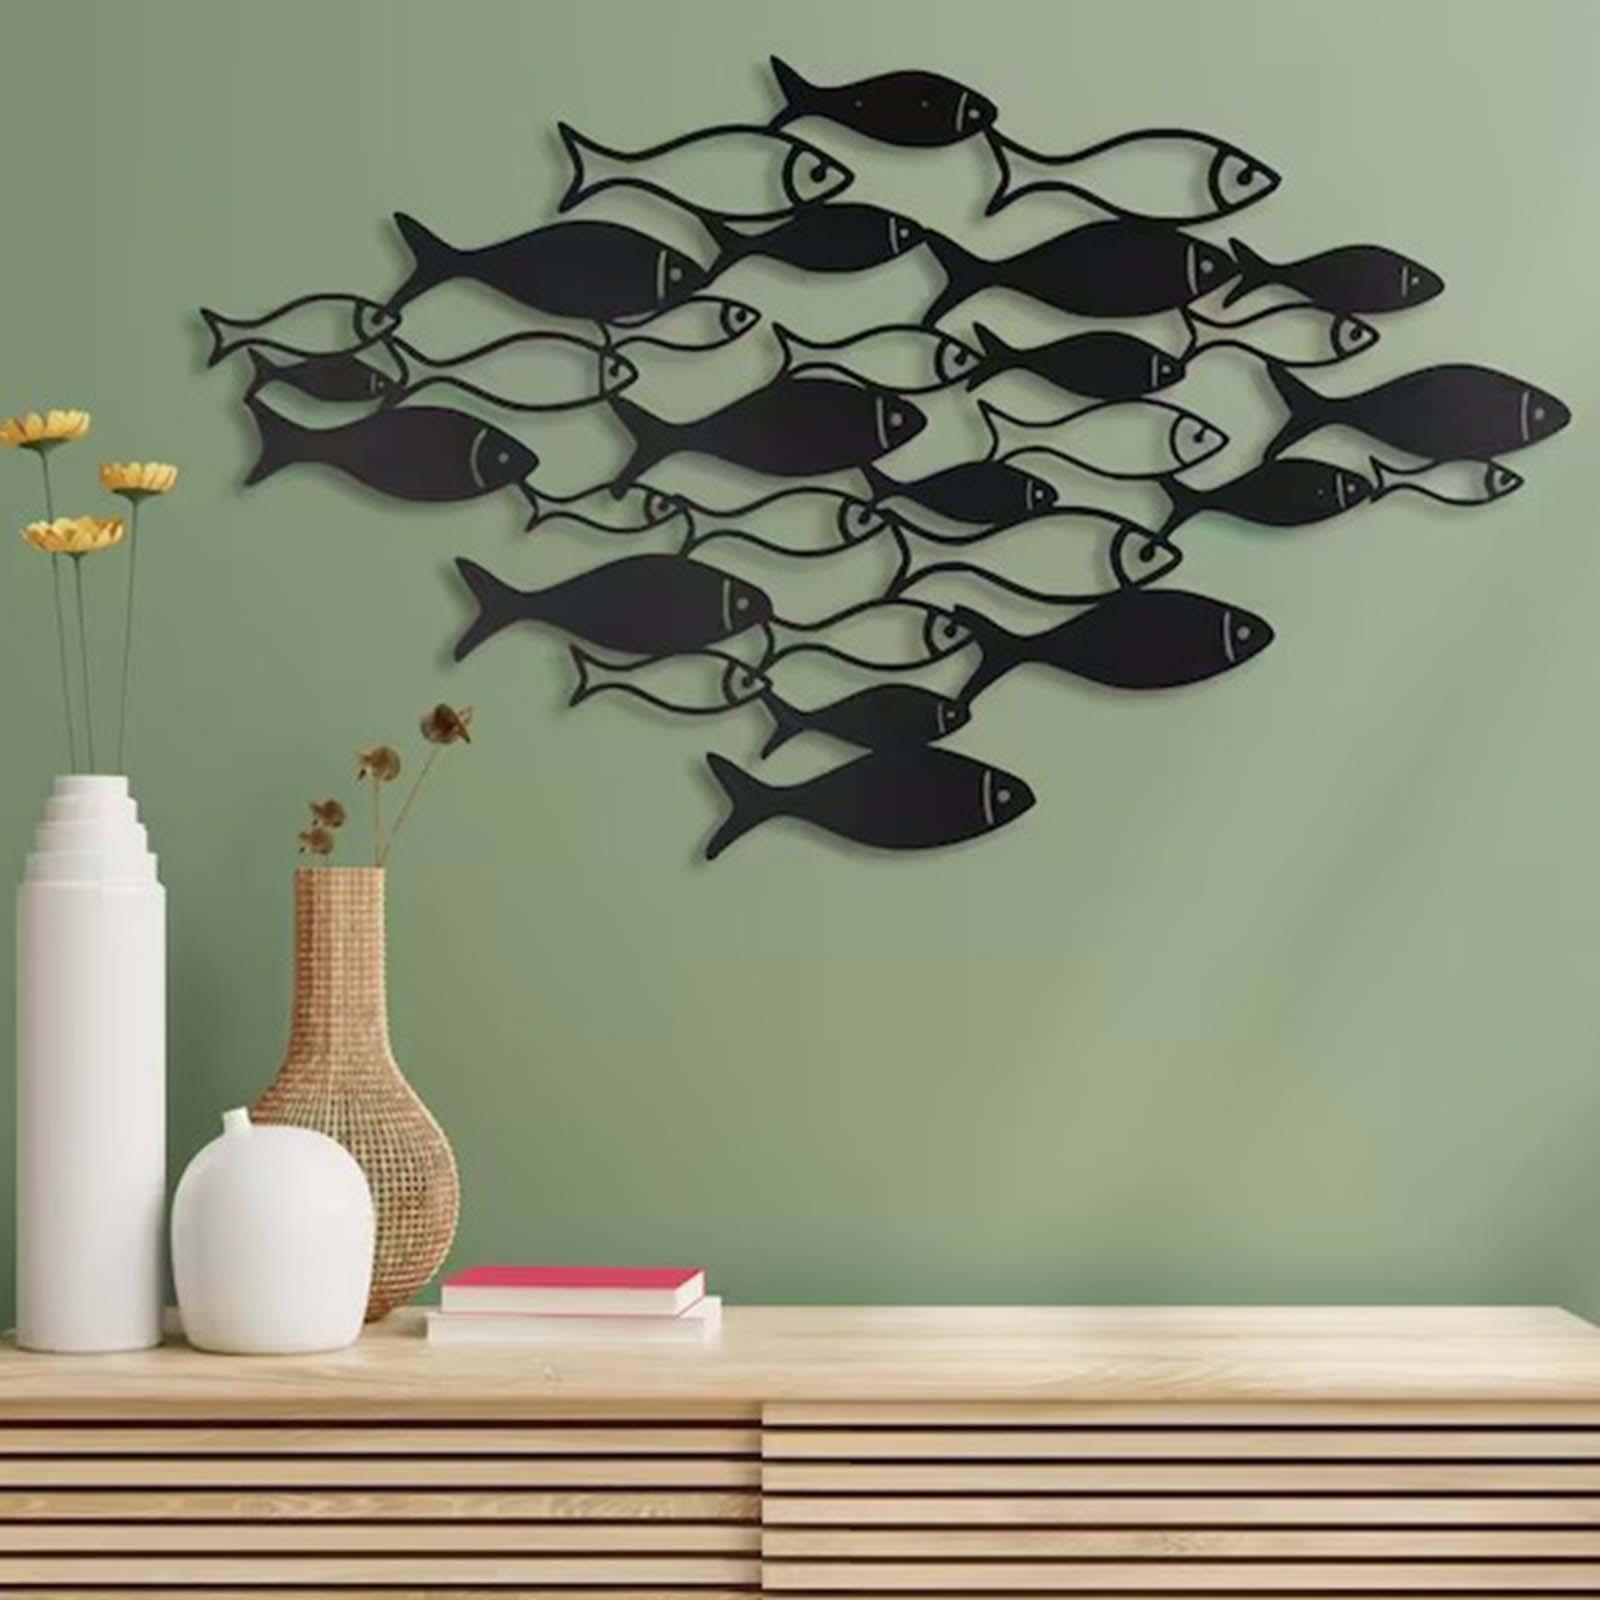 Fish Wall Decor Wall Sculpture Hanging Creative for Office Dining Rooms Wall 30cmx18cm